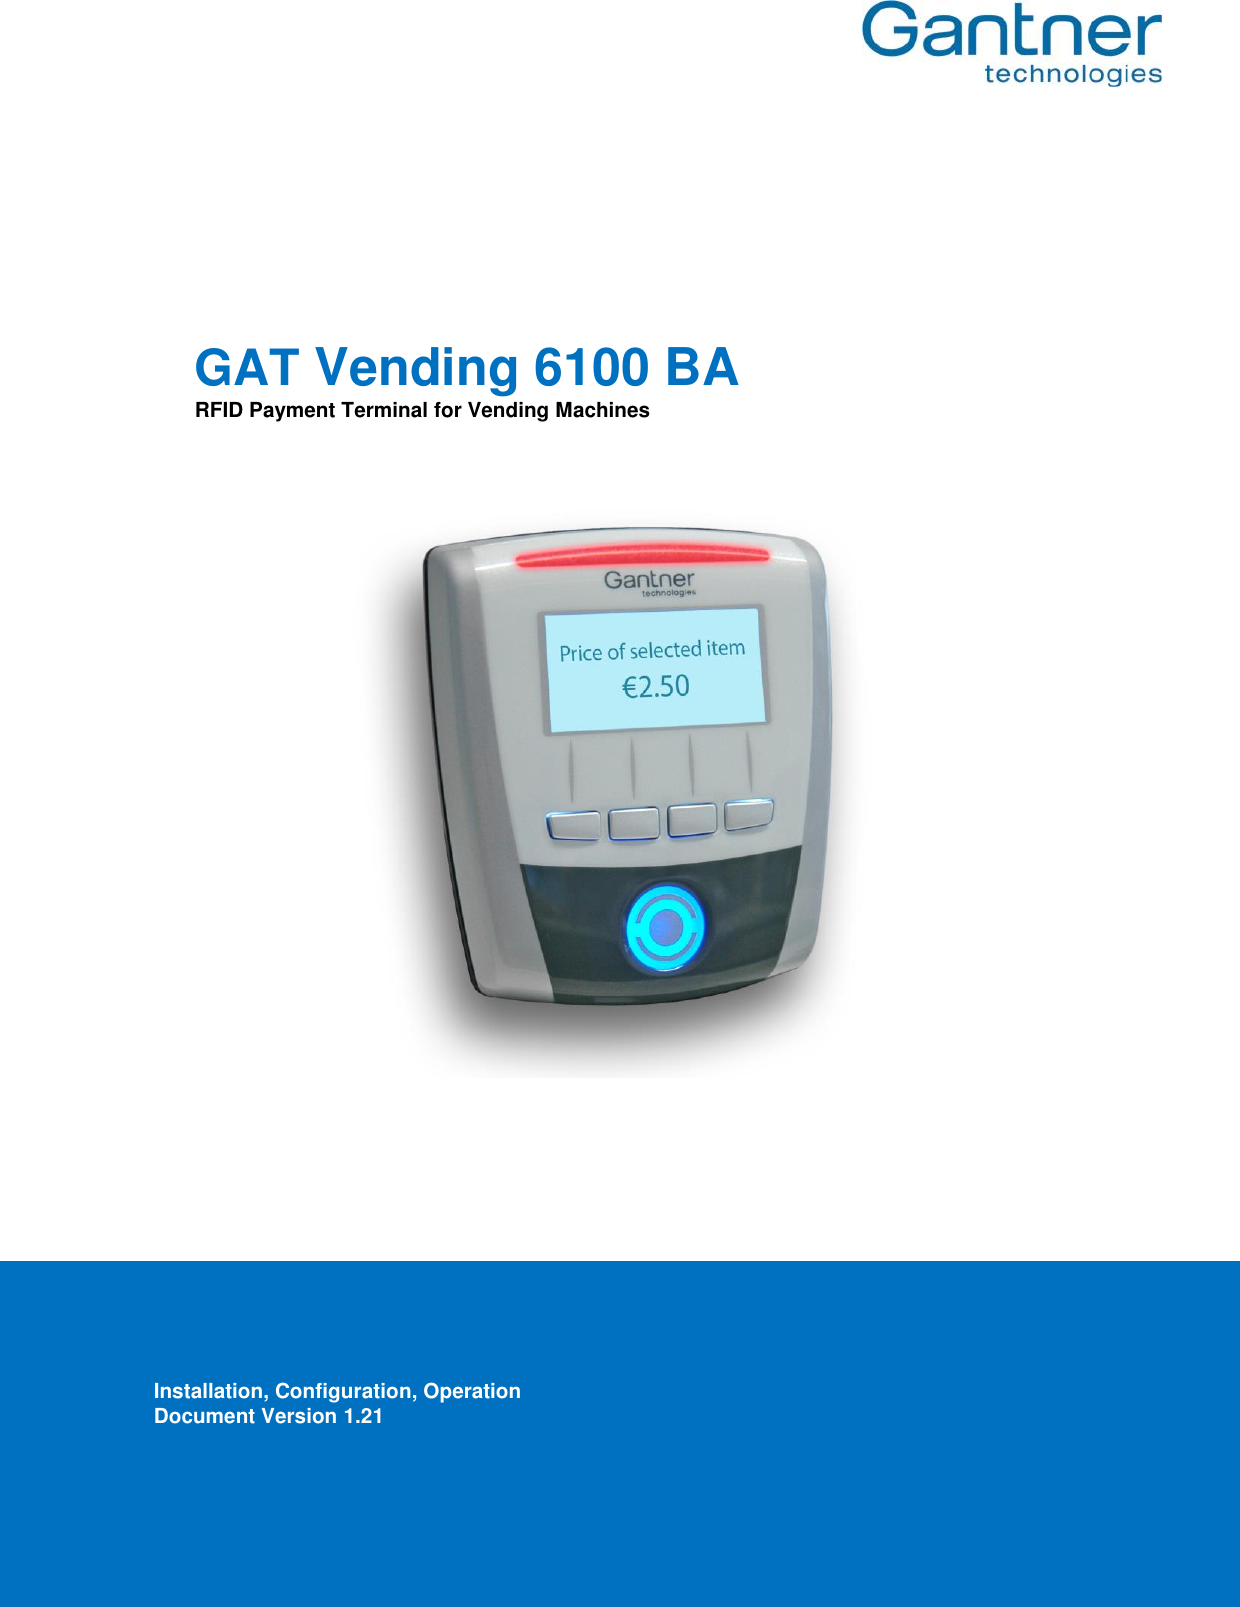       GAT Vending 6100 BA RFID Payment Terminal for Vending Machines                          Installation, Configuration, Operation Document Version 1.21 